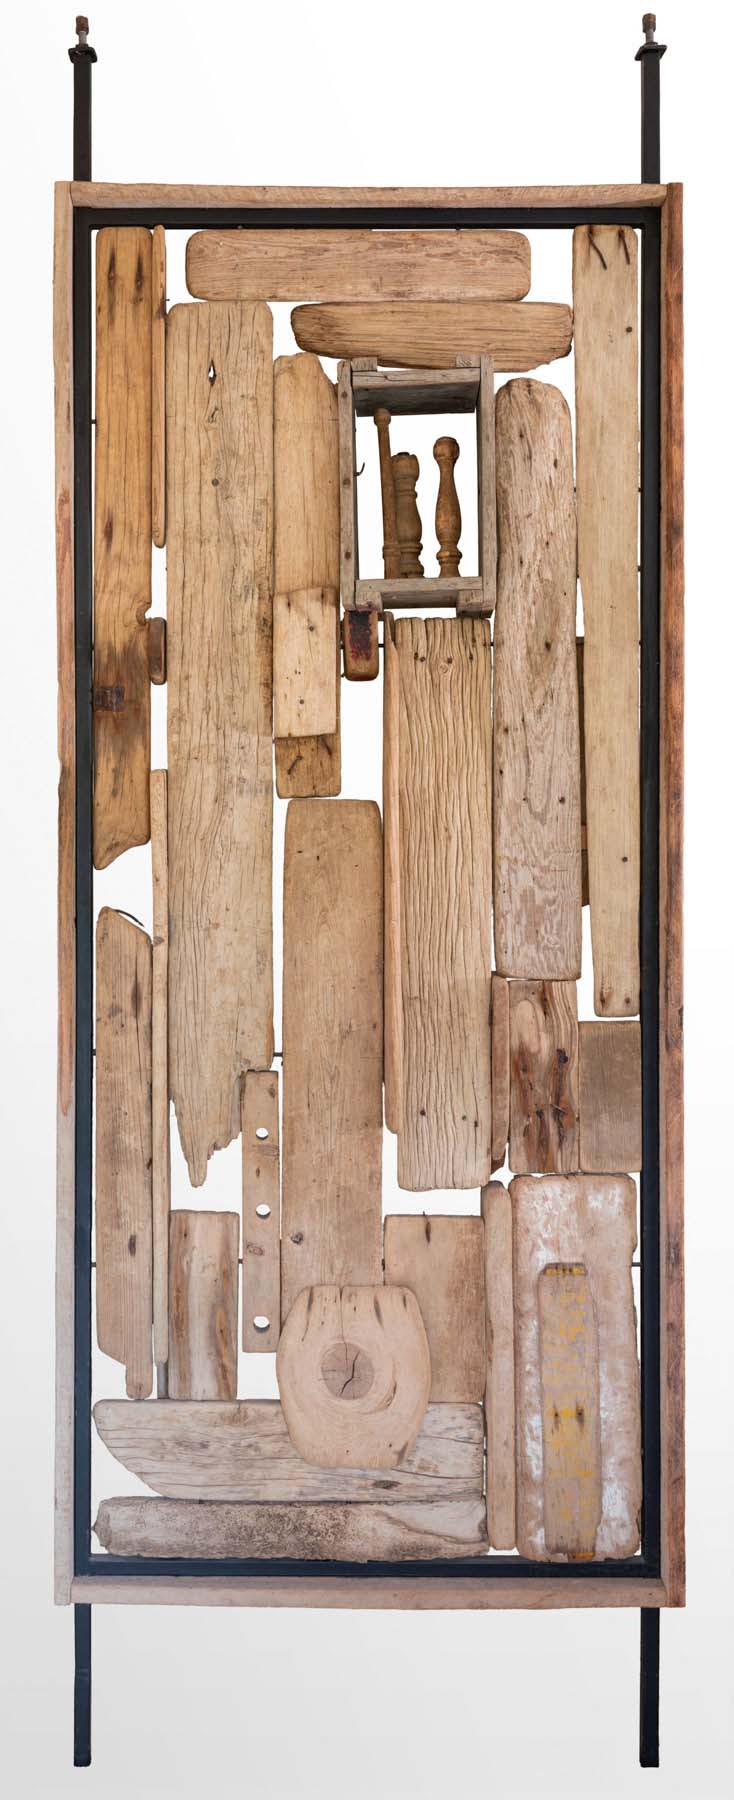 Pieces of flat, worn wood of different sizes and shapes assembled in a metal frame.